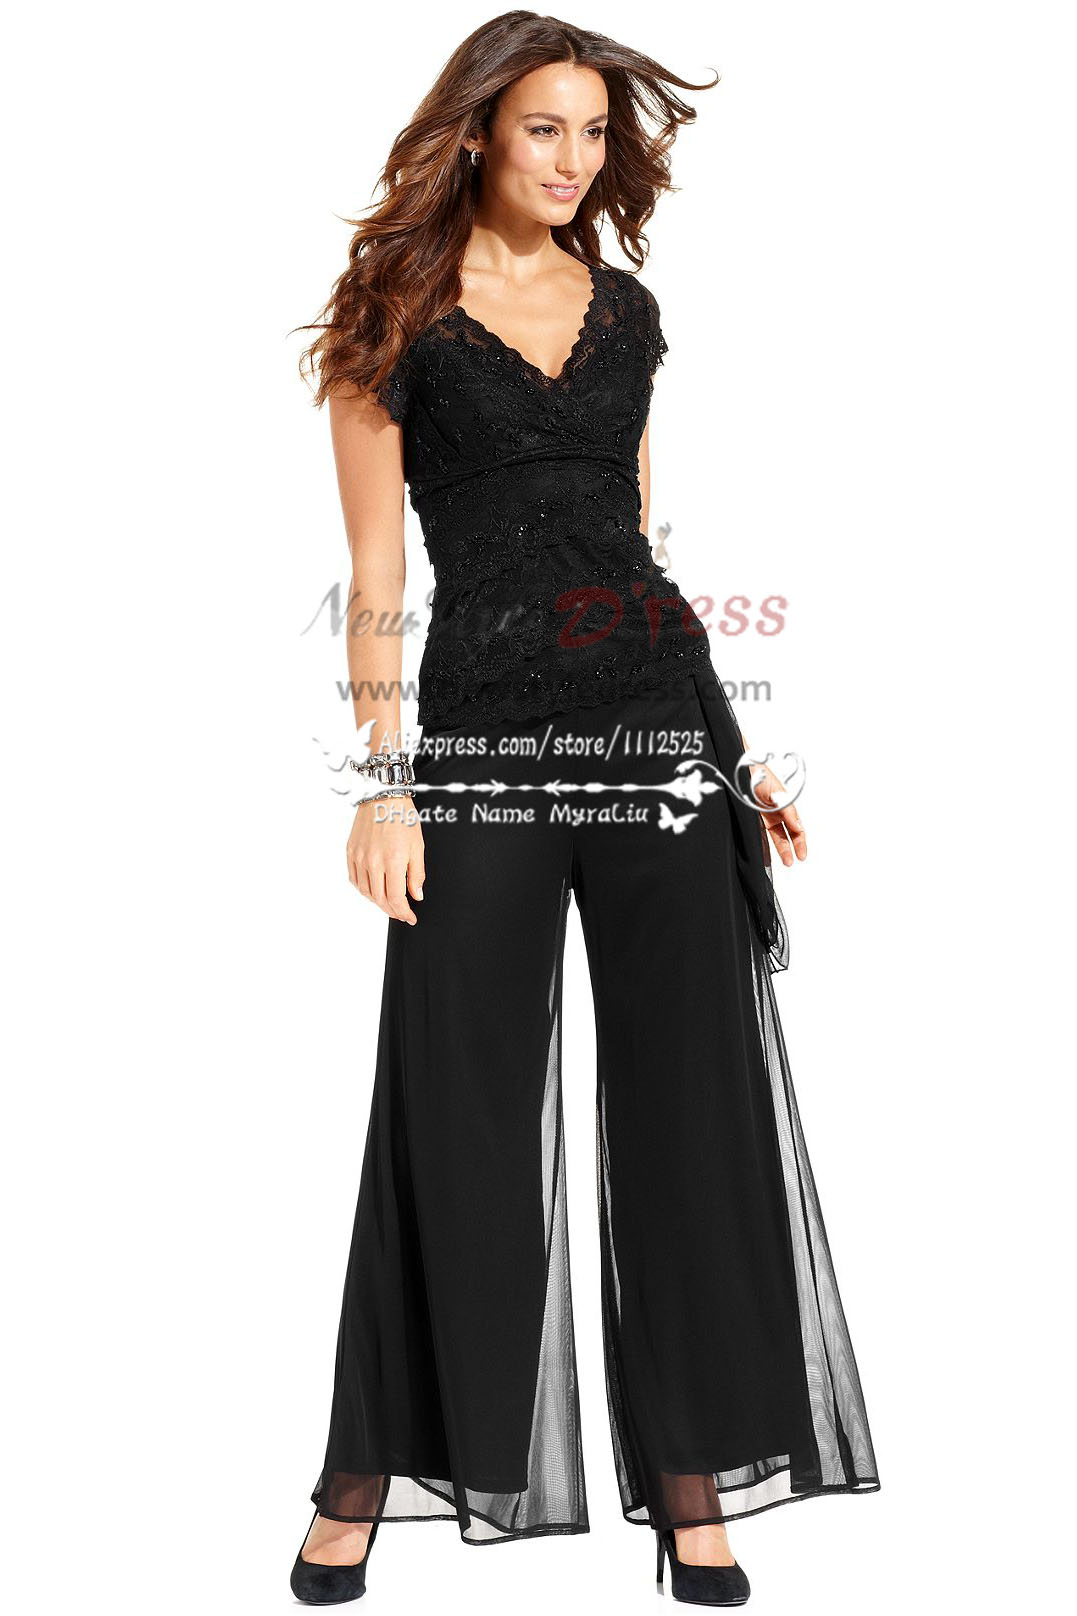 Sexy black lace Women's Apparel nmo-162 - Mother's Pant Suits